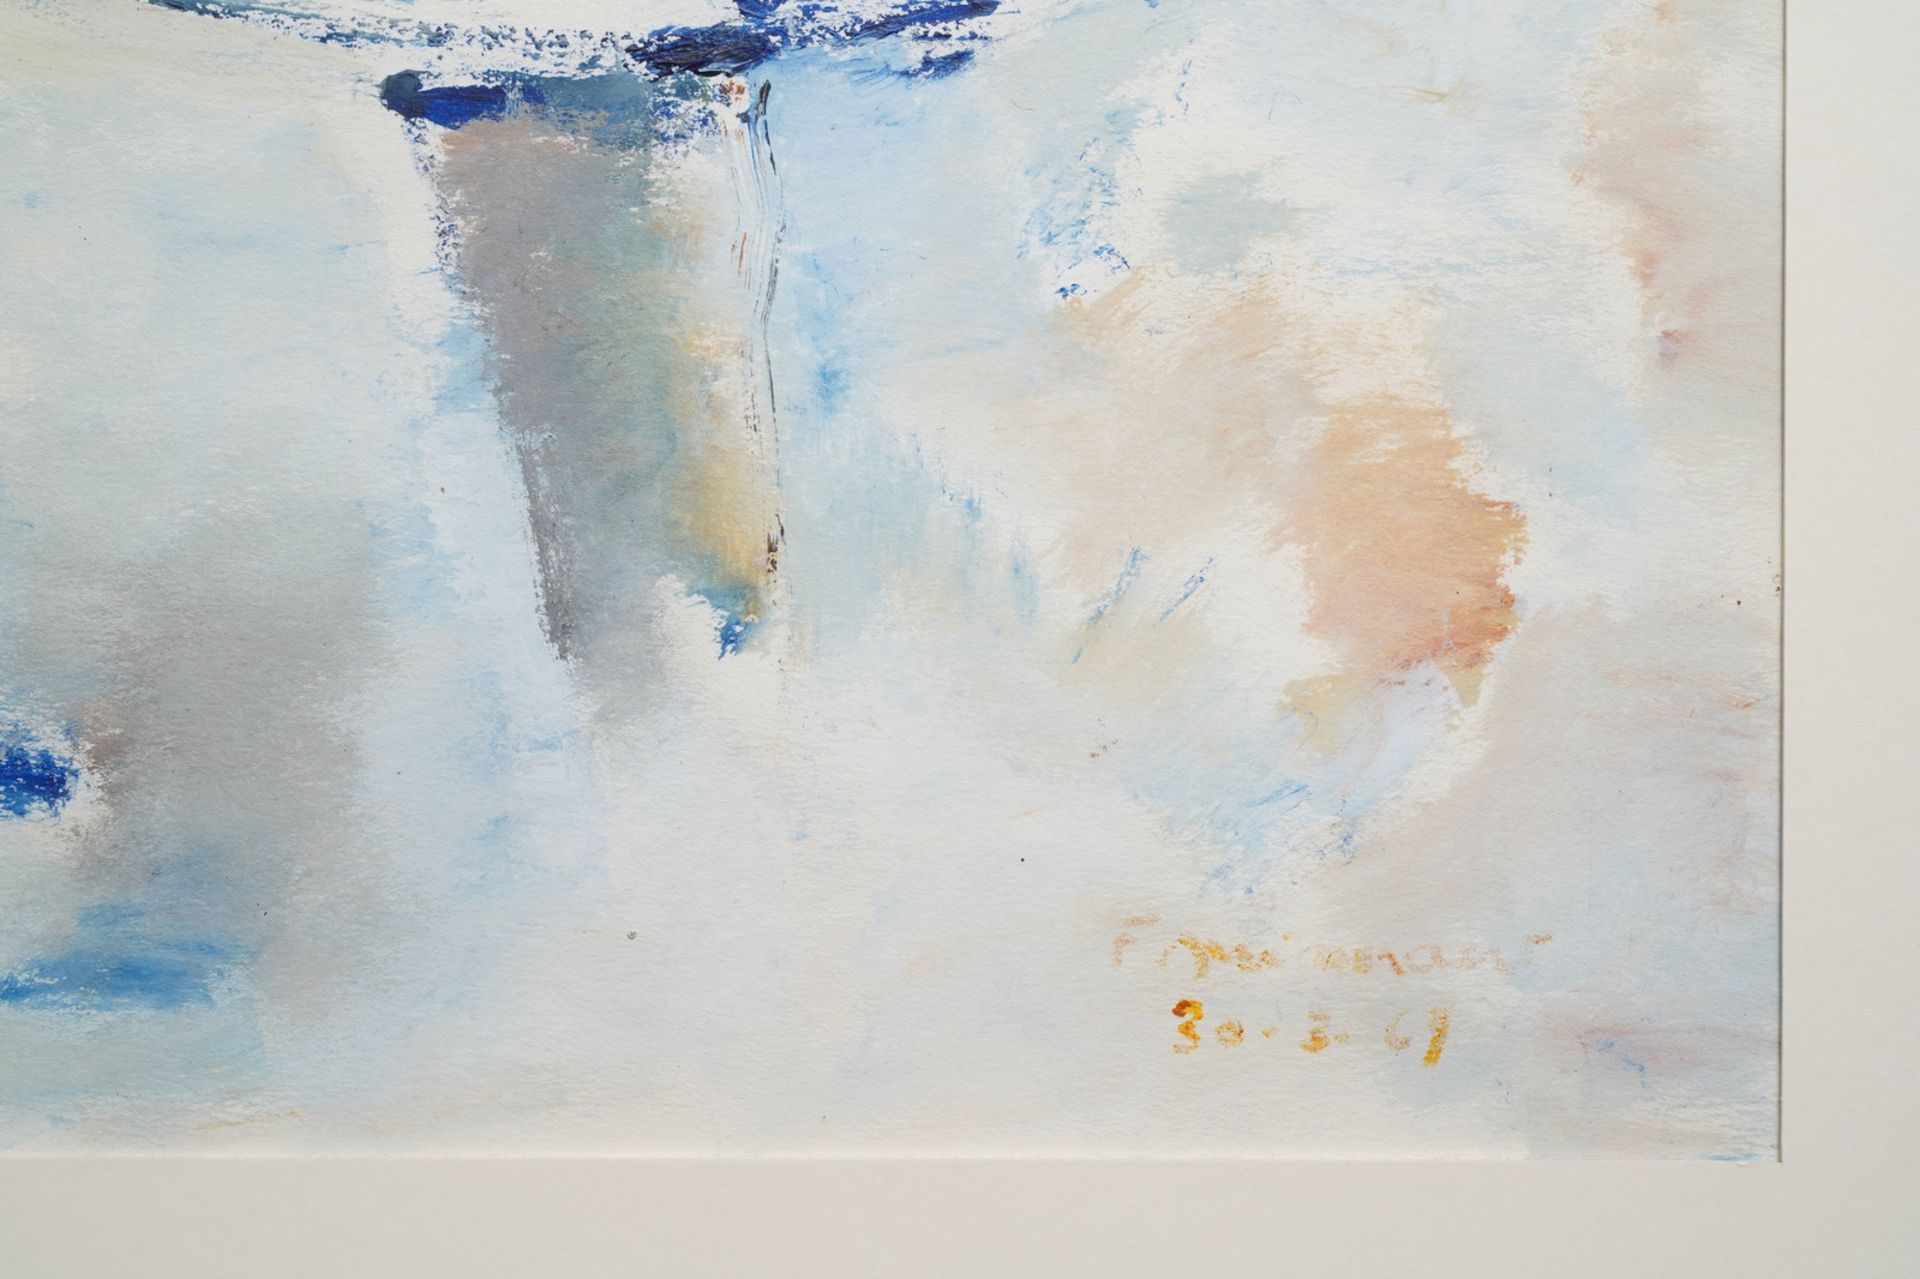 Frans Minnaert (1929-2011): Untitled, watercolour on paper, dated [19]69 - Image 5 of 5